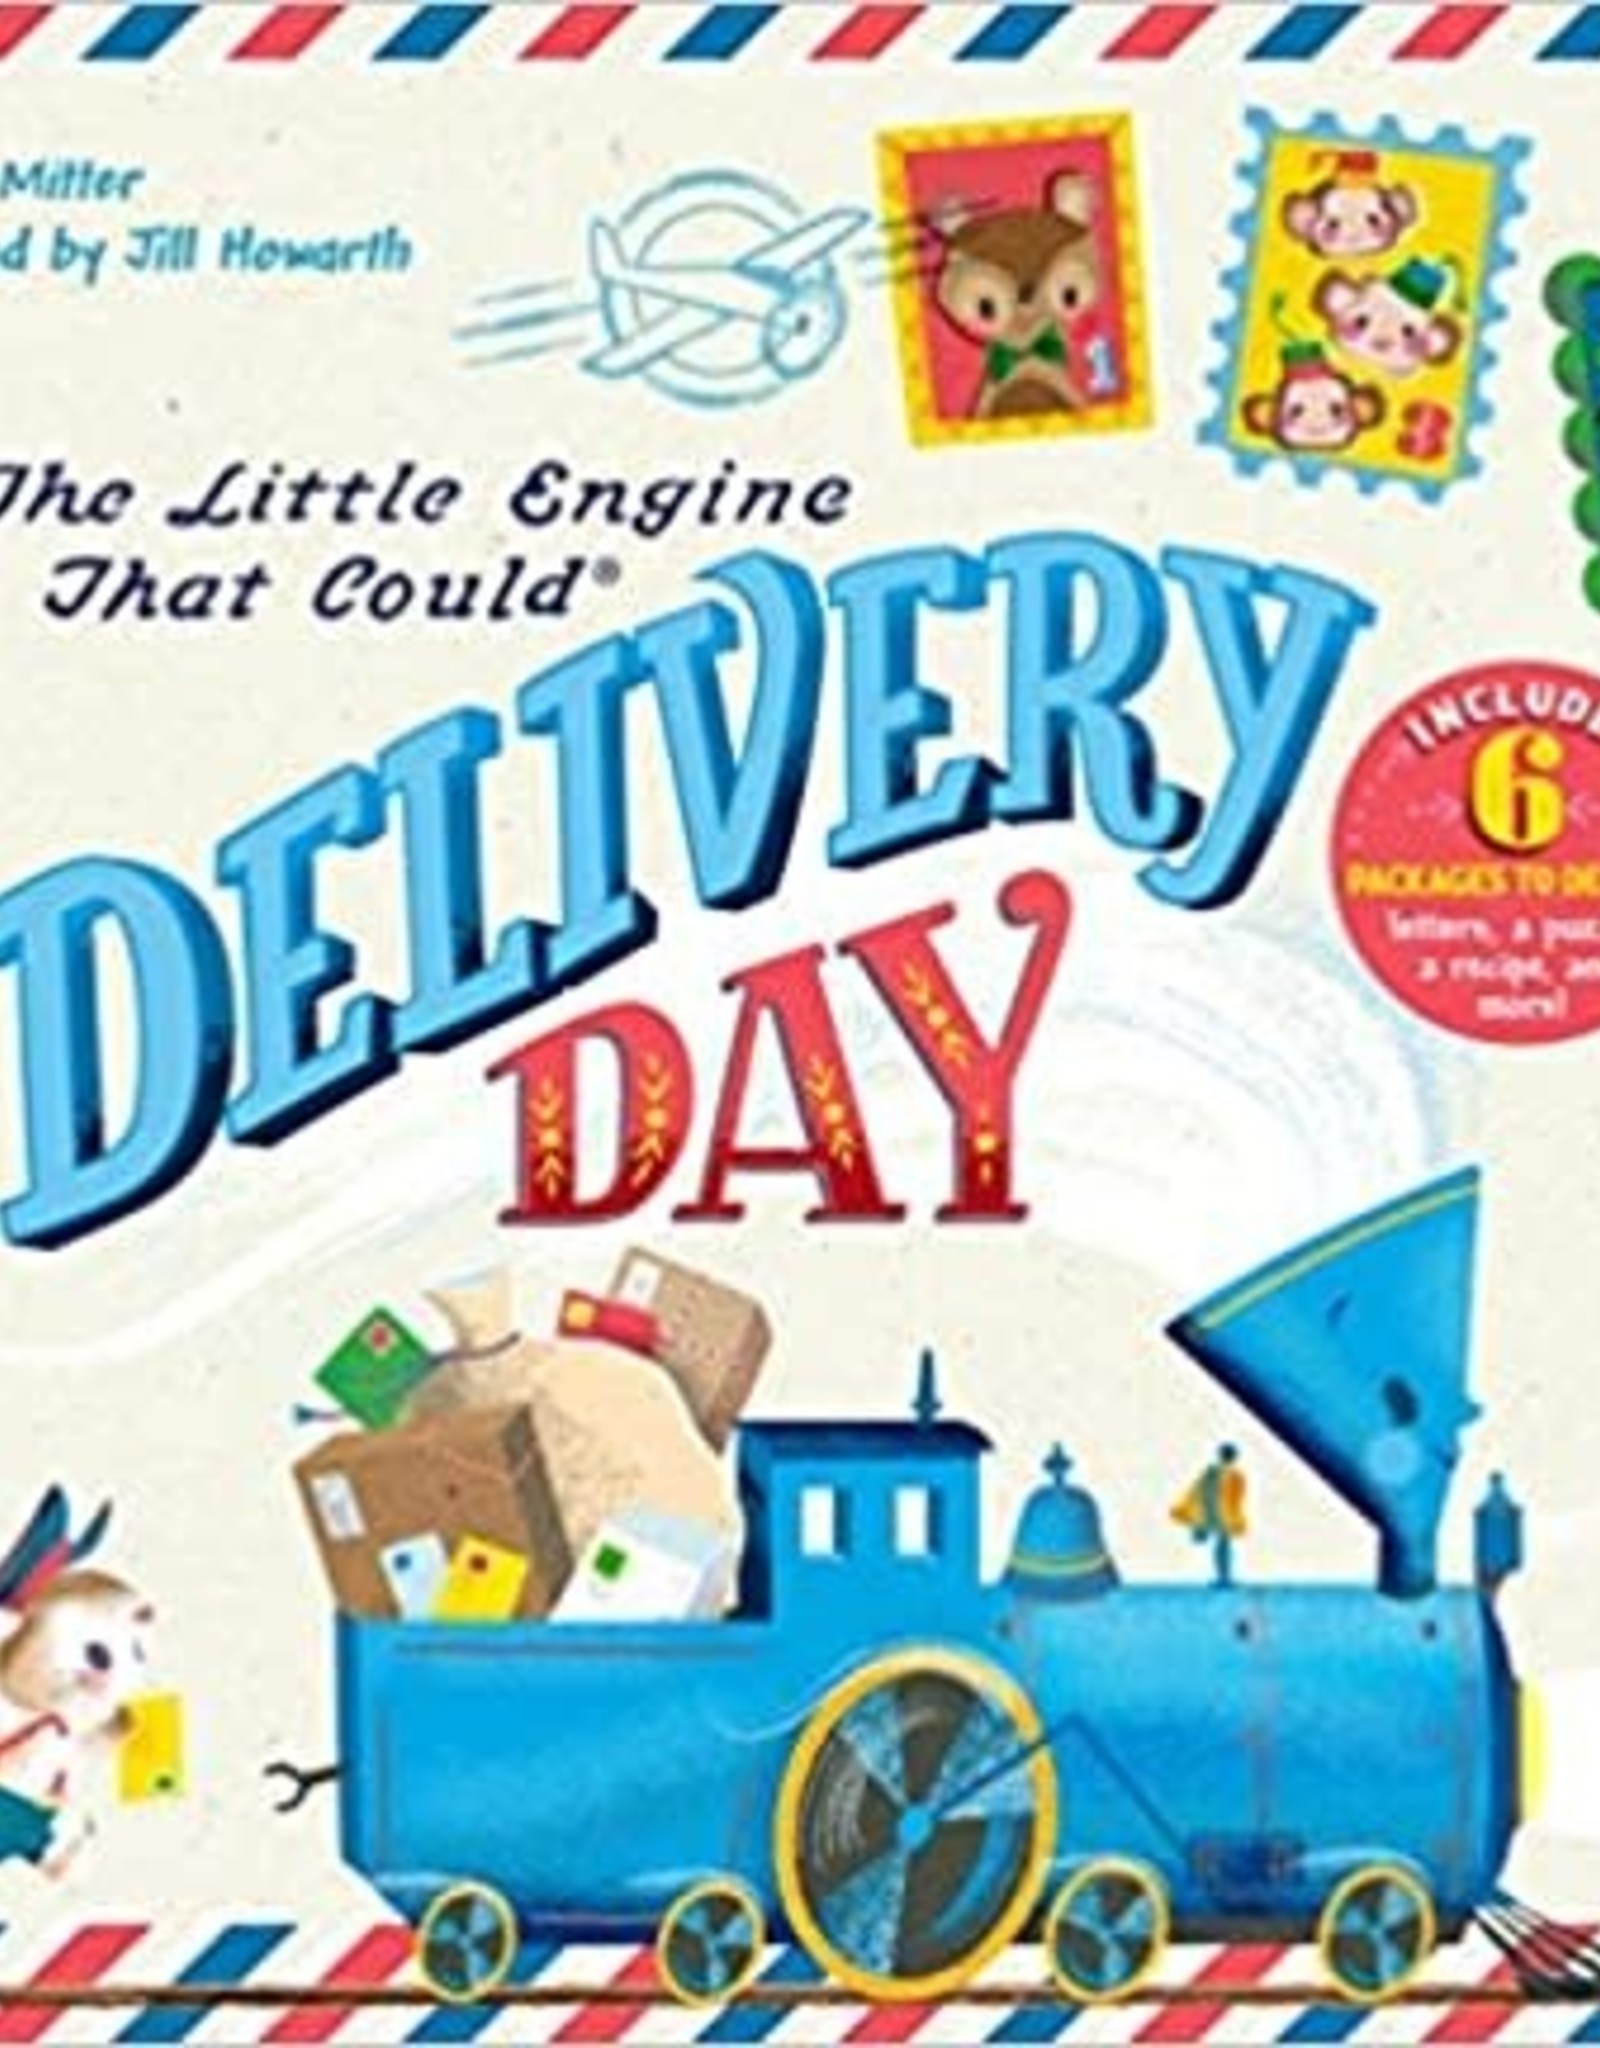 BOOK PUBLISHERS THE LITTLE ENGINE THAT COULD DELIVERY DAY